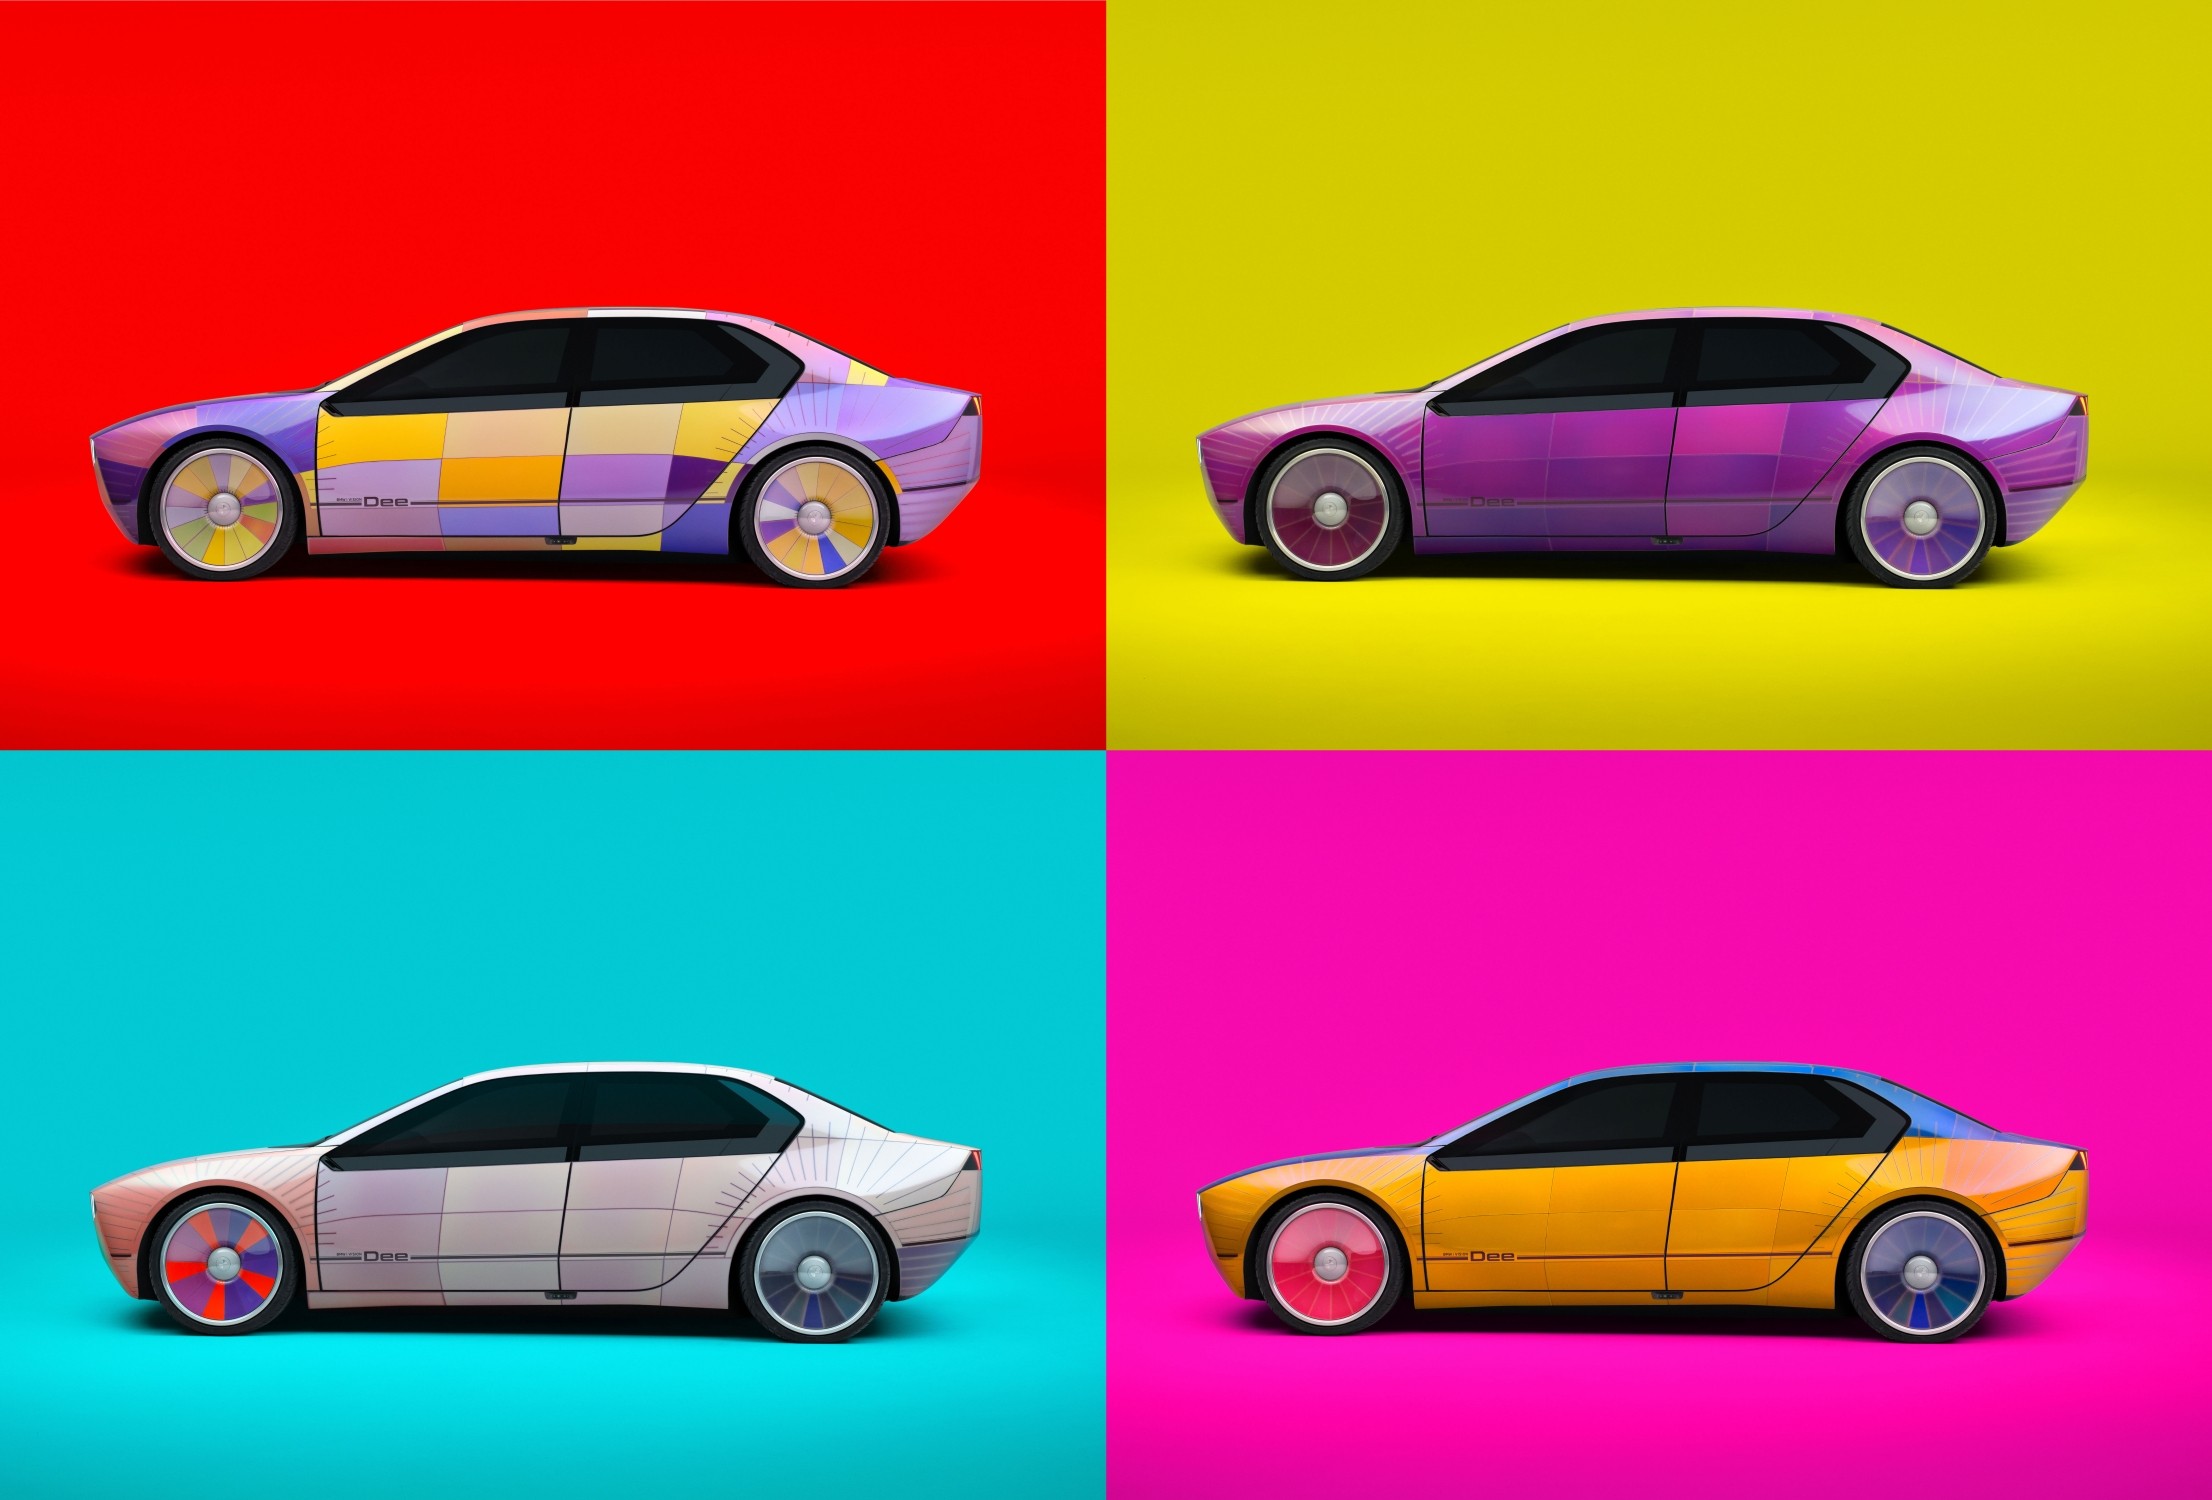 Check out BMW's color-changing concept car in action - The Verge